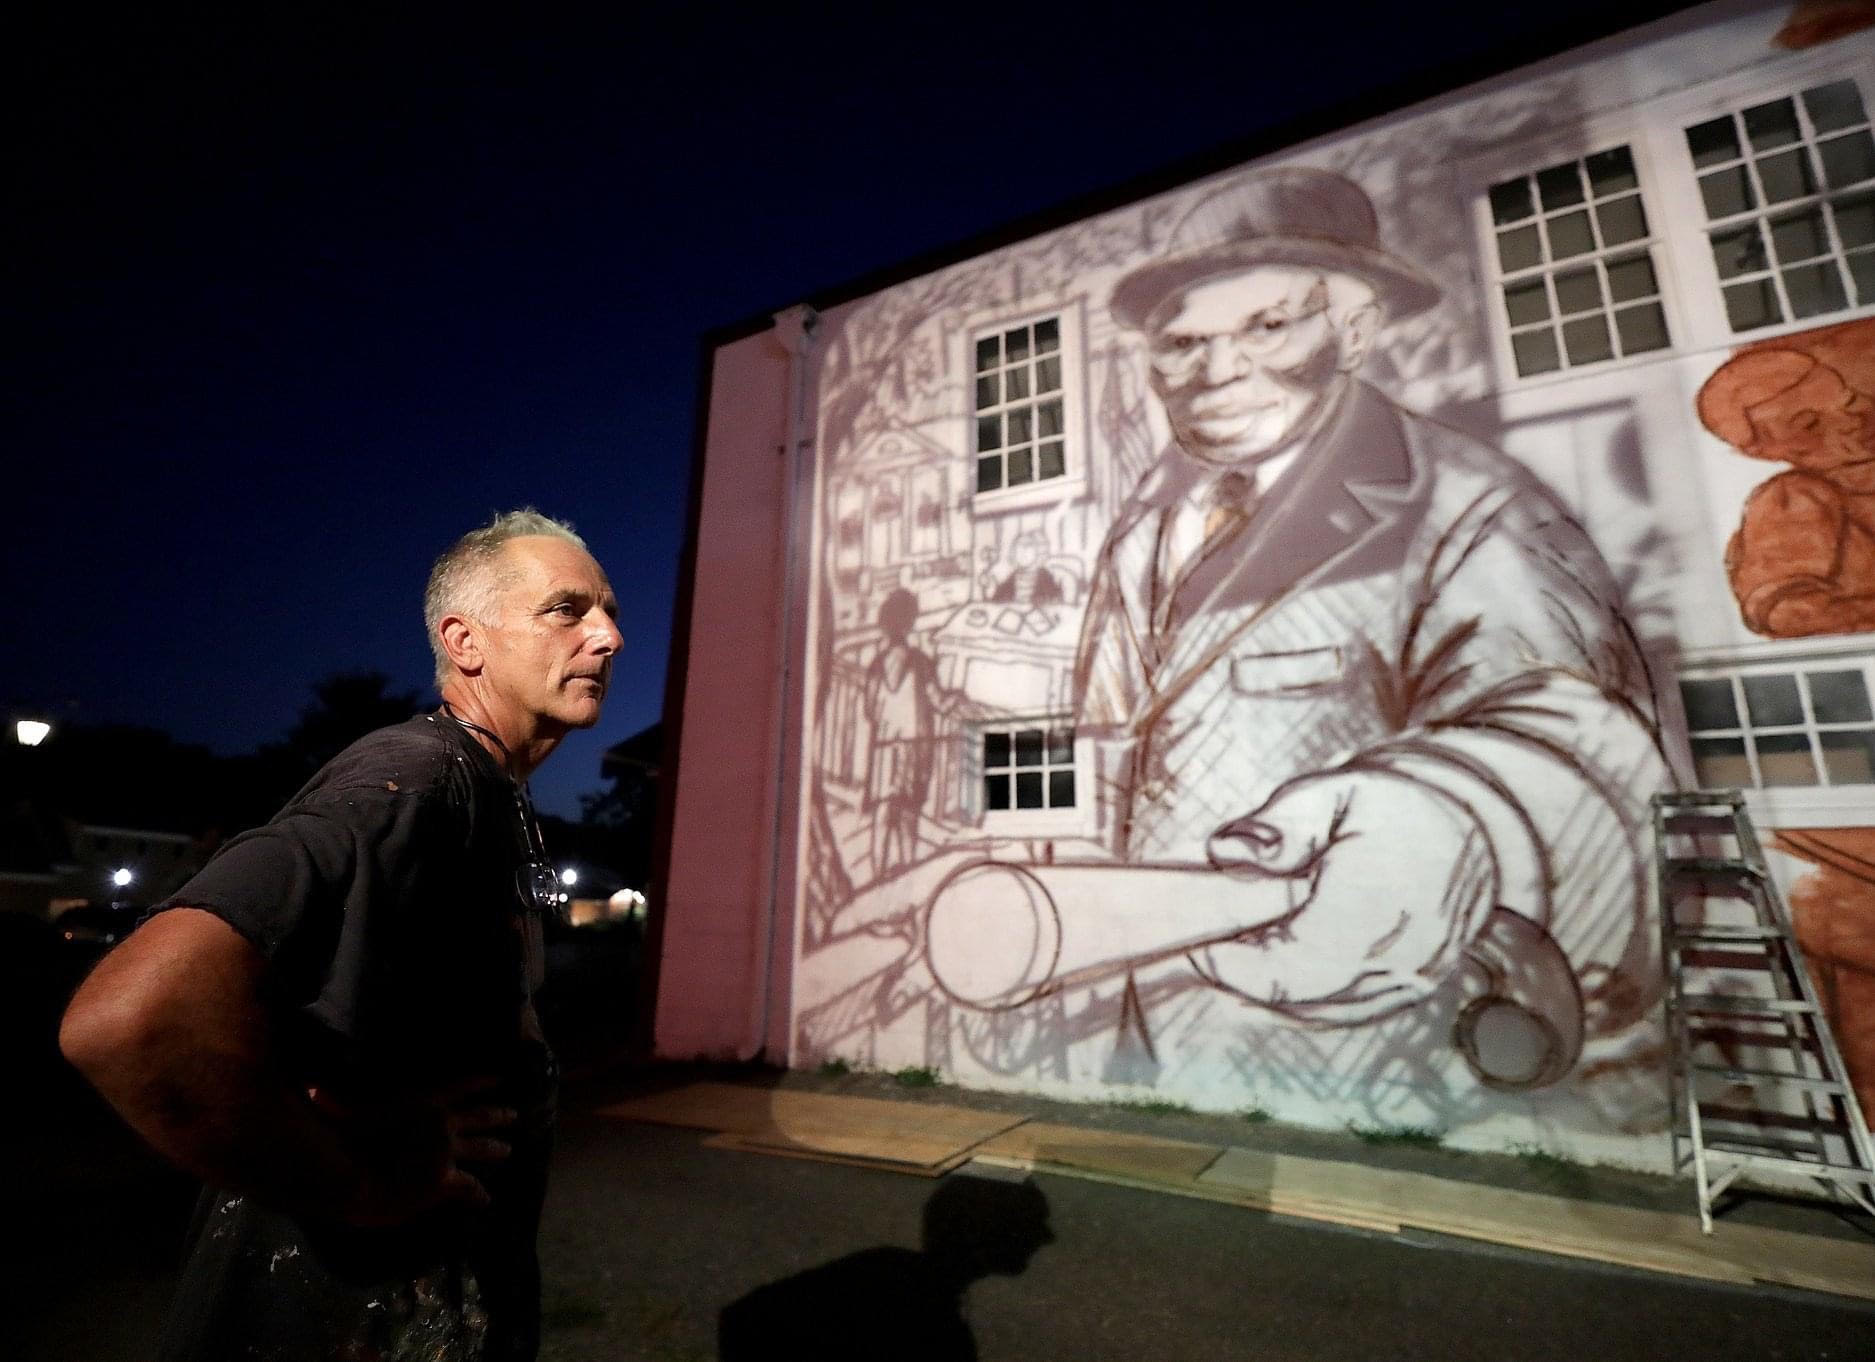 lawyer heal Specific Mural Honors Legacy of T.C. Walker in Gloucester, VA